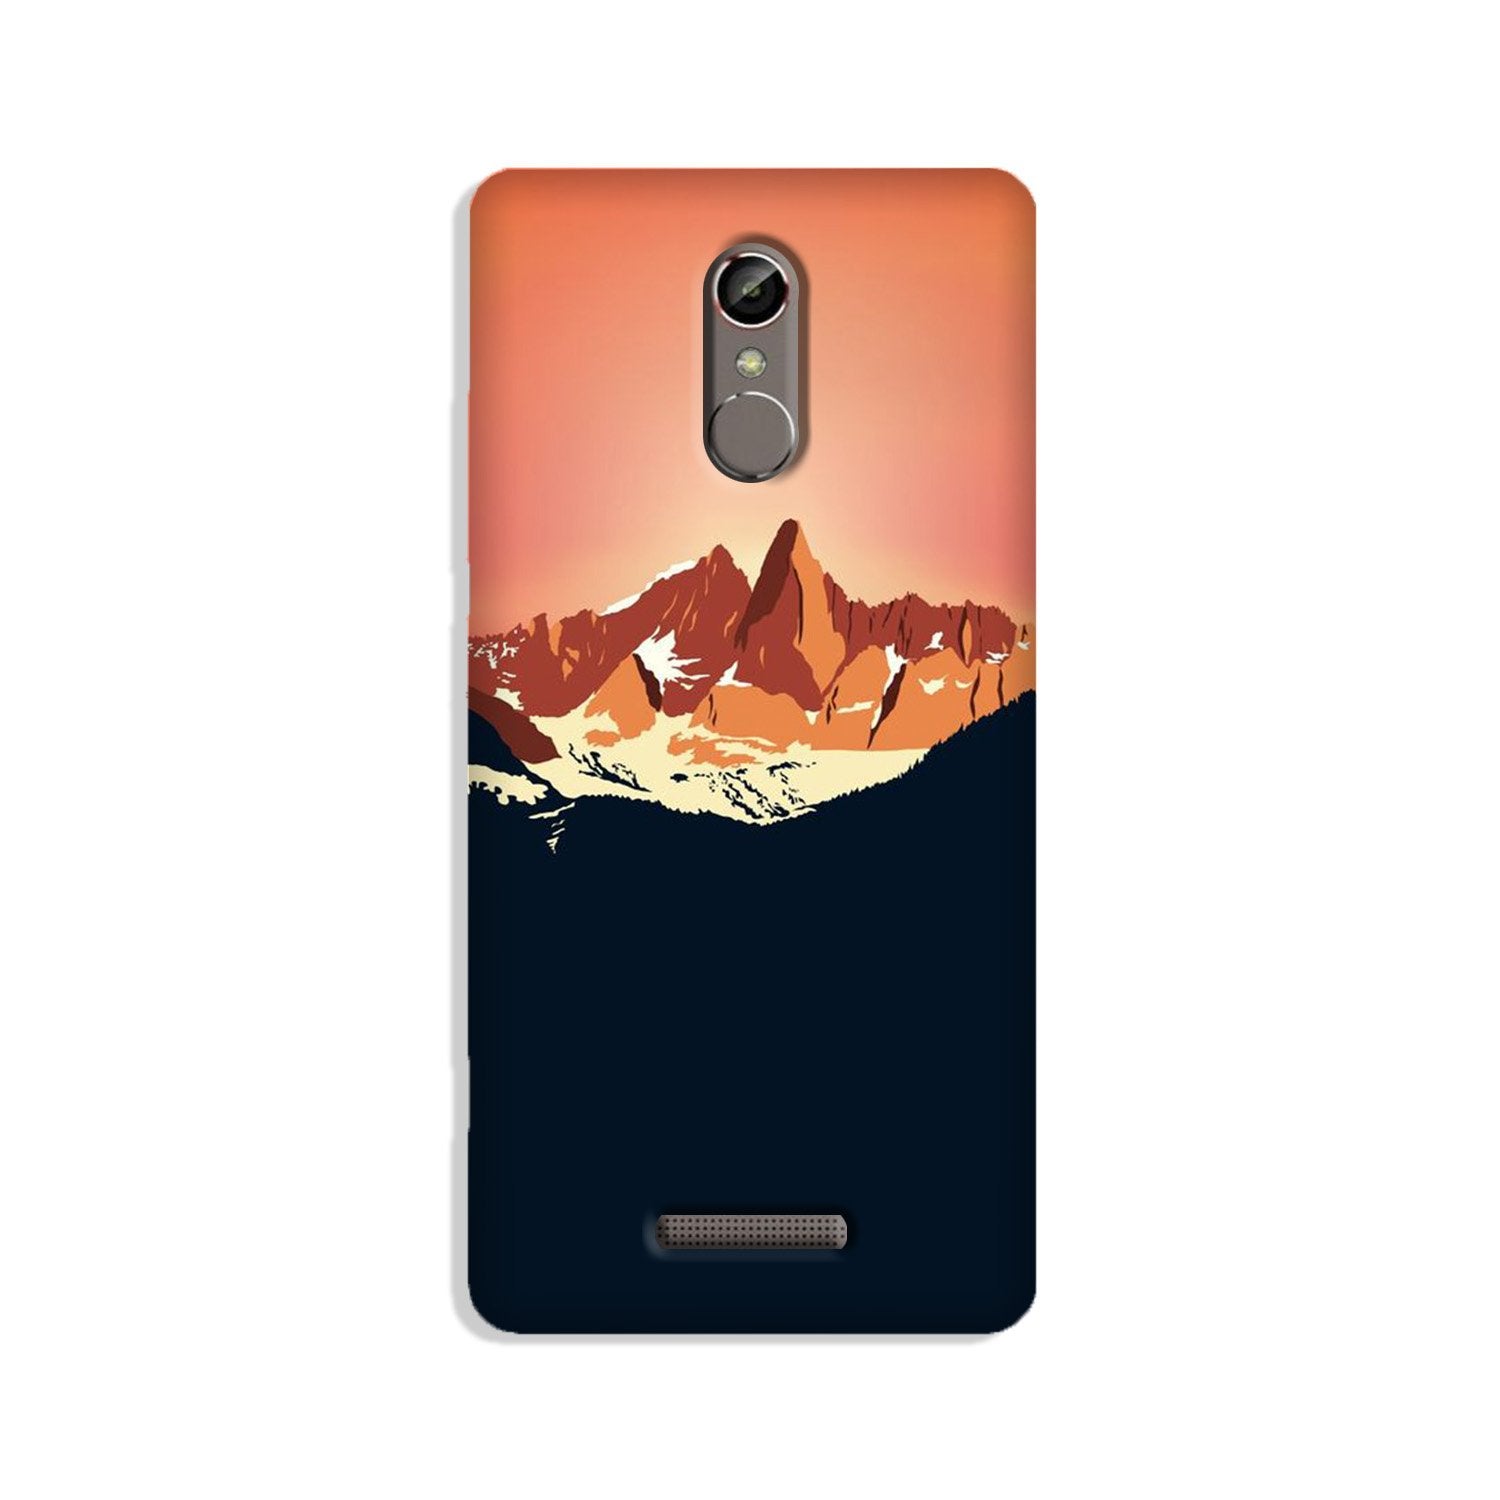 Mountains Case for Gionee S6s (Design No. 227)